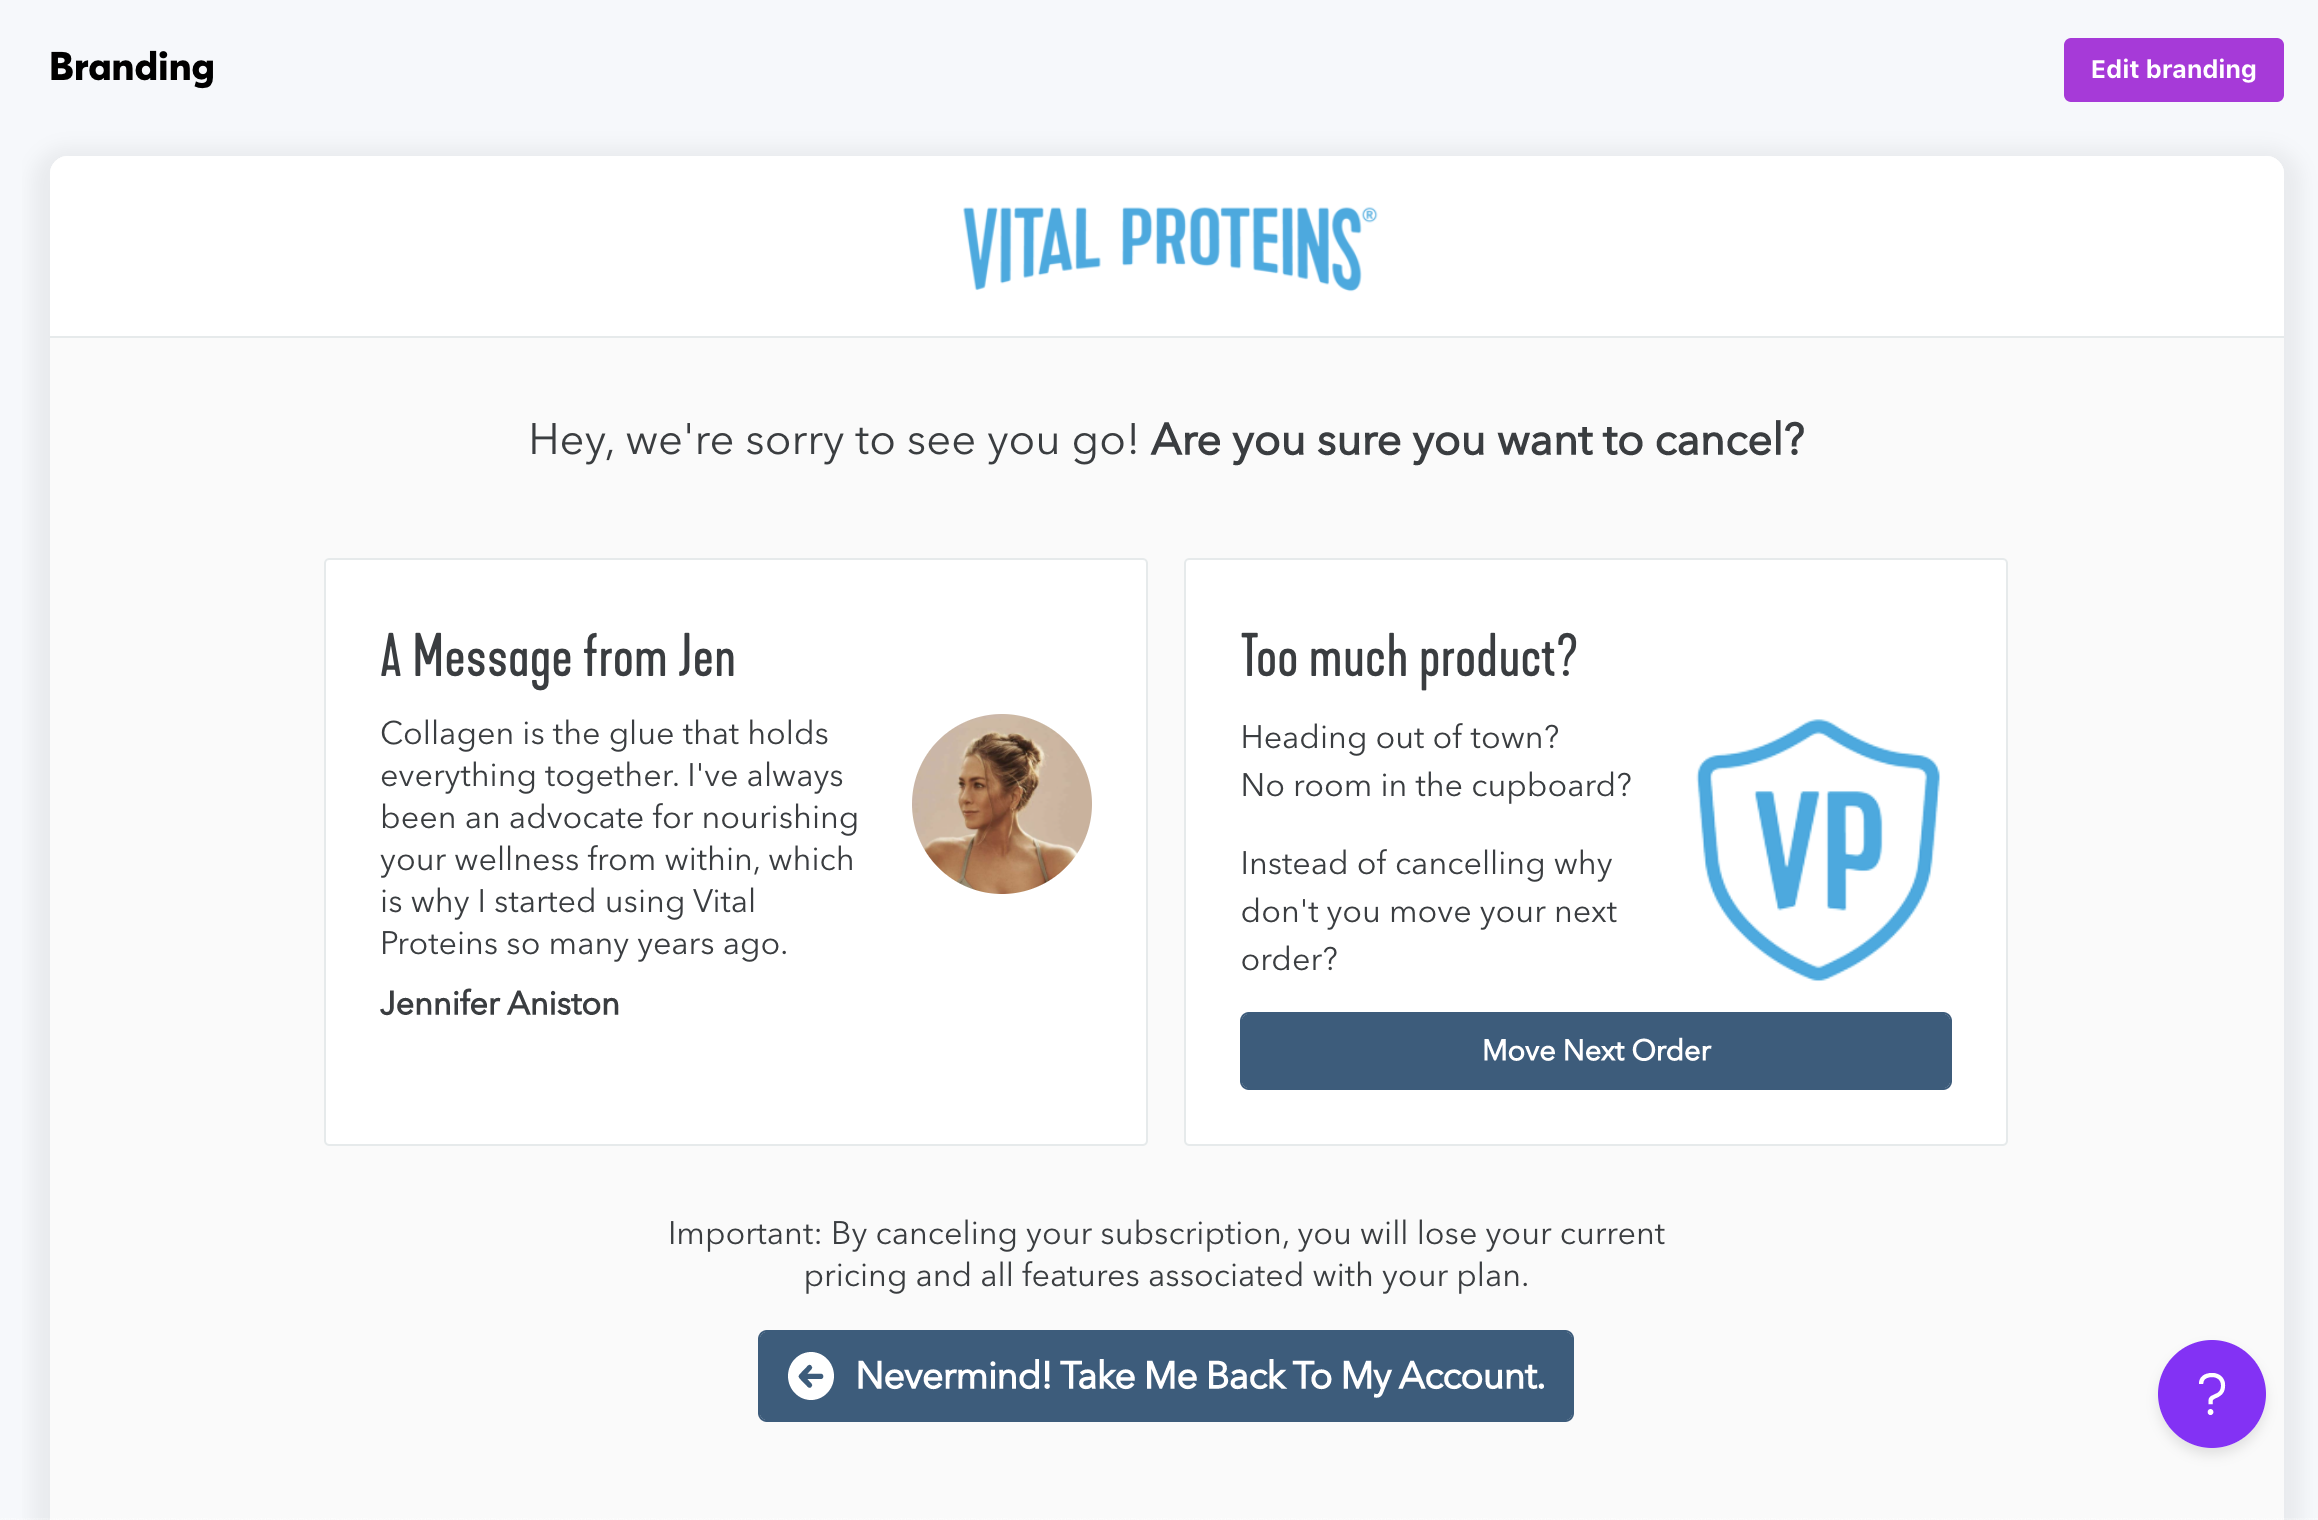 Vital Proteins' Brightback Cancel page with a familiar Friends superstar